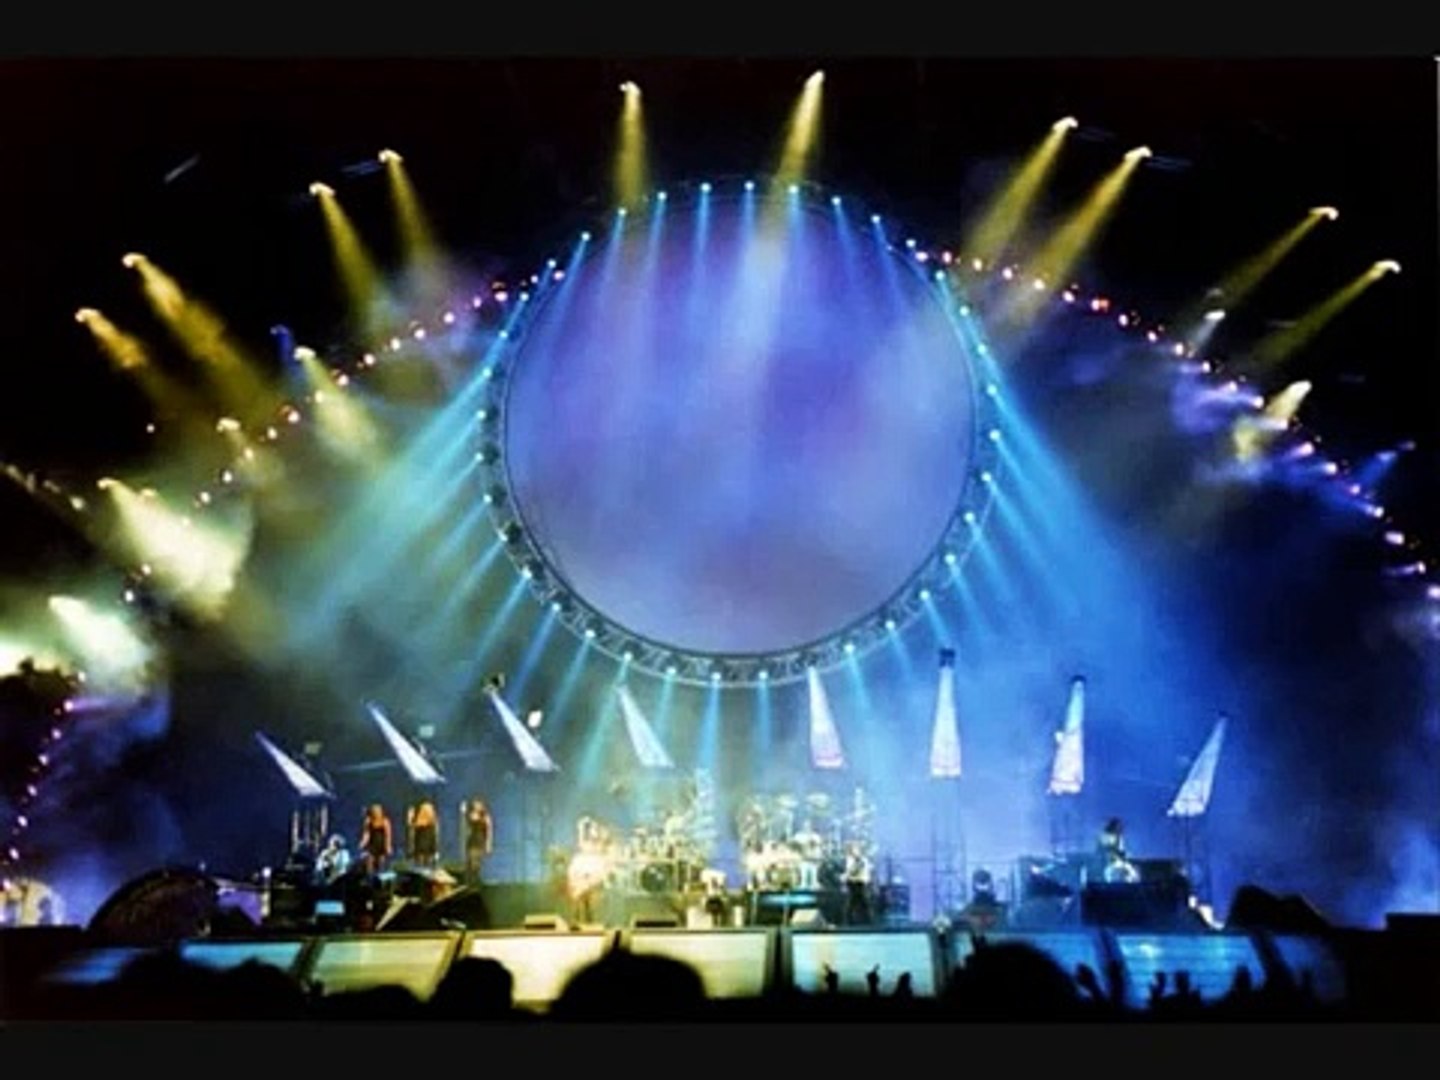 Pink Floyd - Comfortably Numb torino 1994 rare version - Amazing Solo -  video dailymotion